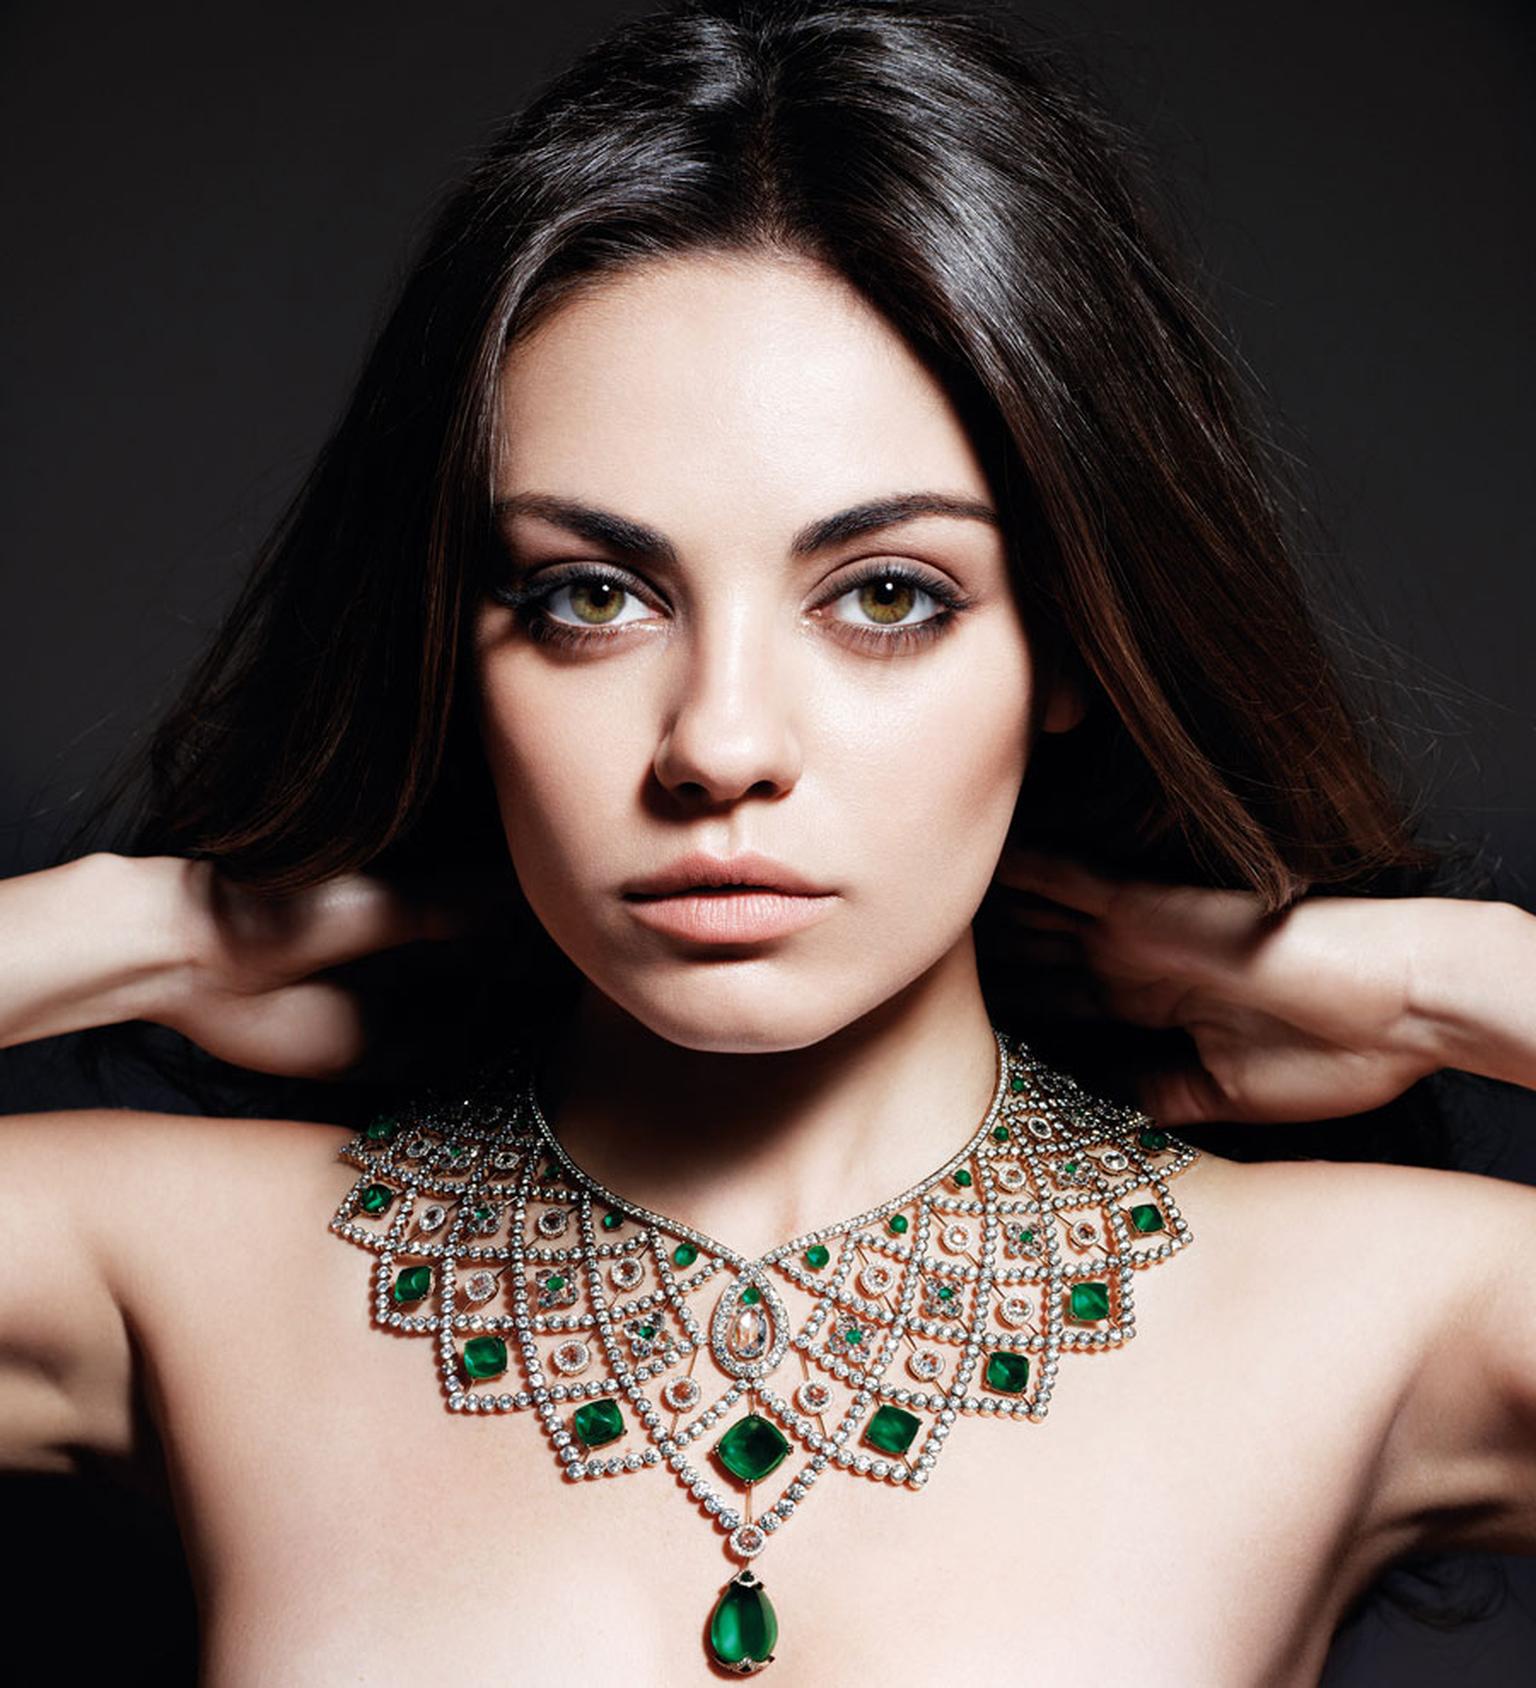 In 2013, Gemfields announced its new Global Ambassador: Hollywood starlet Mila Kunis. Here she wears an impressive emerald and diamond collar style 'Romanov' necklace by Fabergé set with ethical Gemfields emeralds.